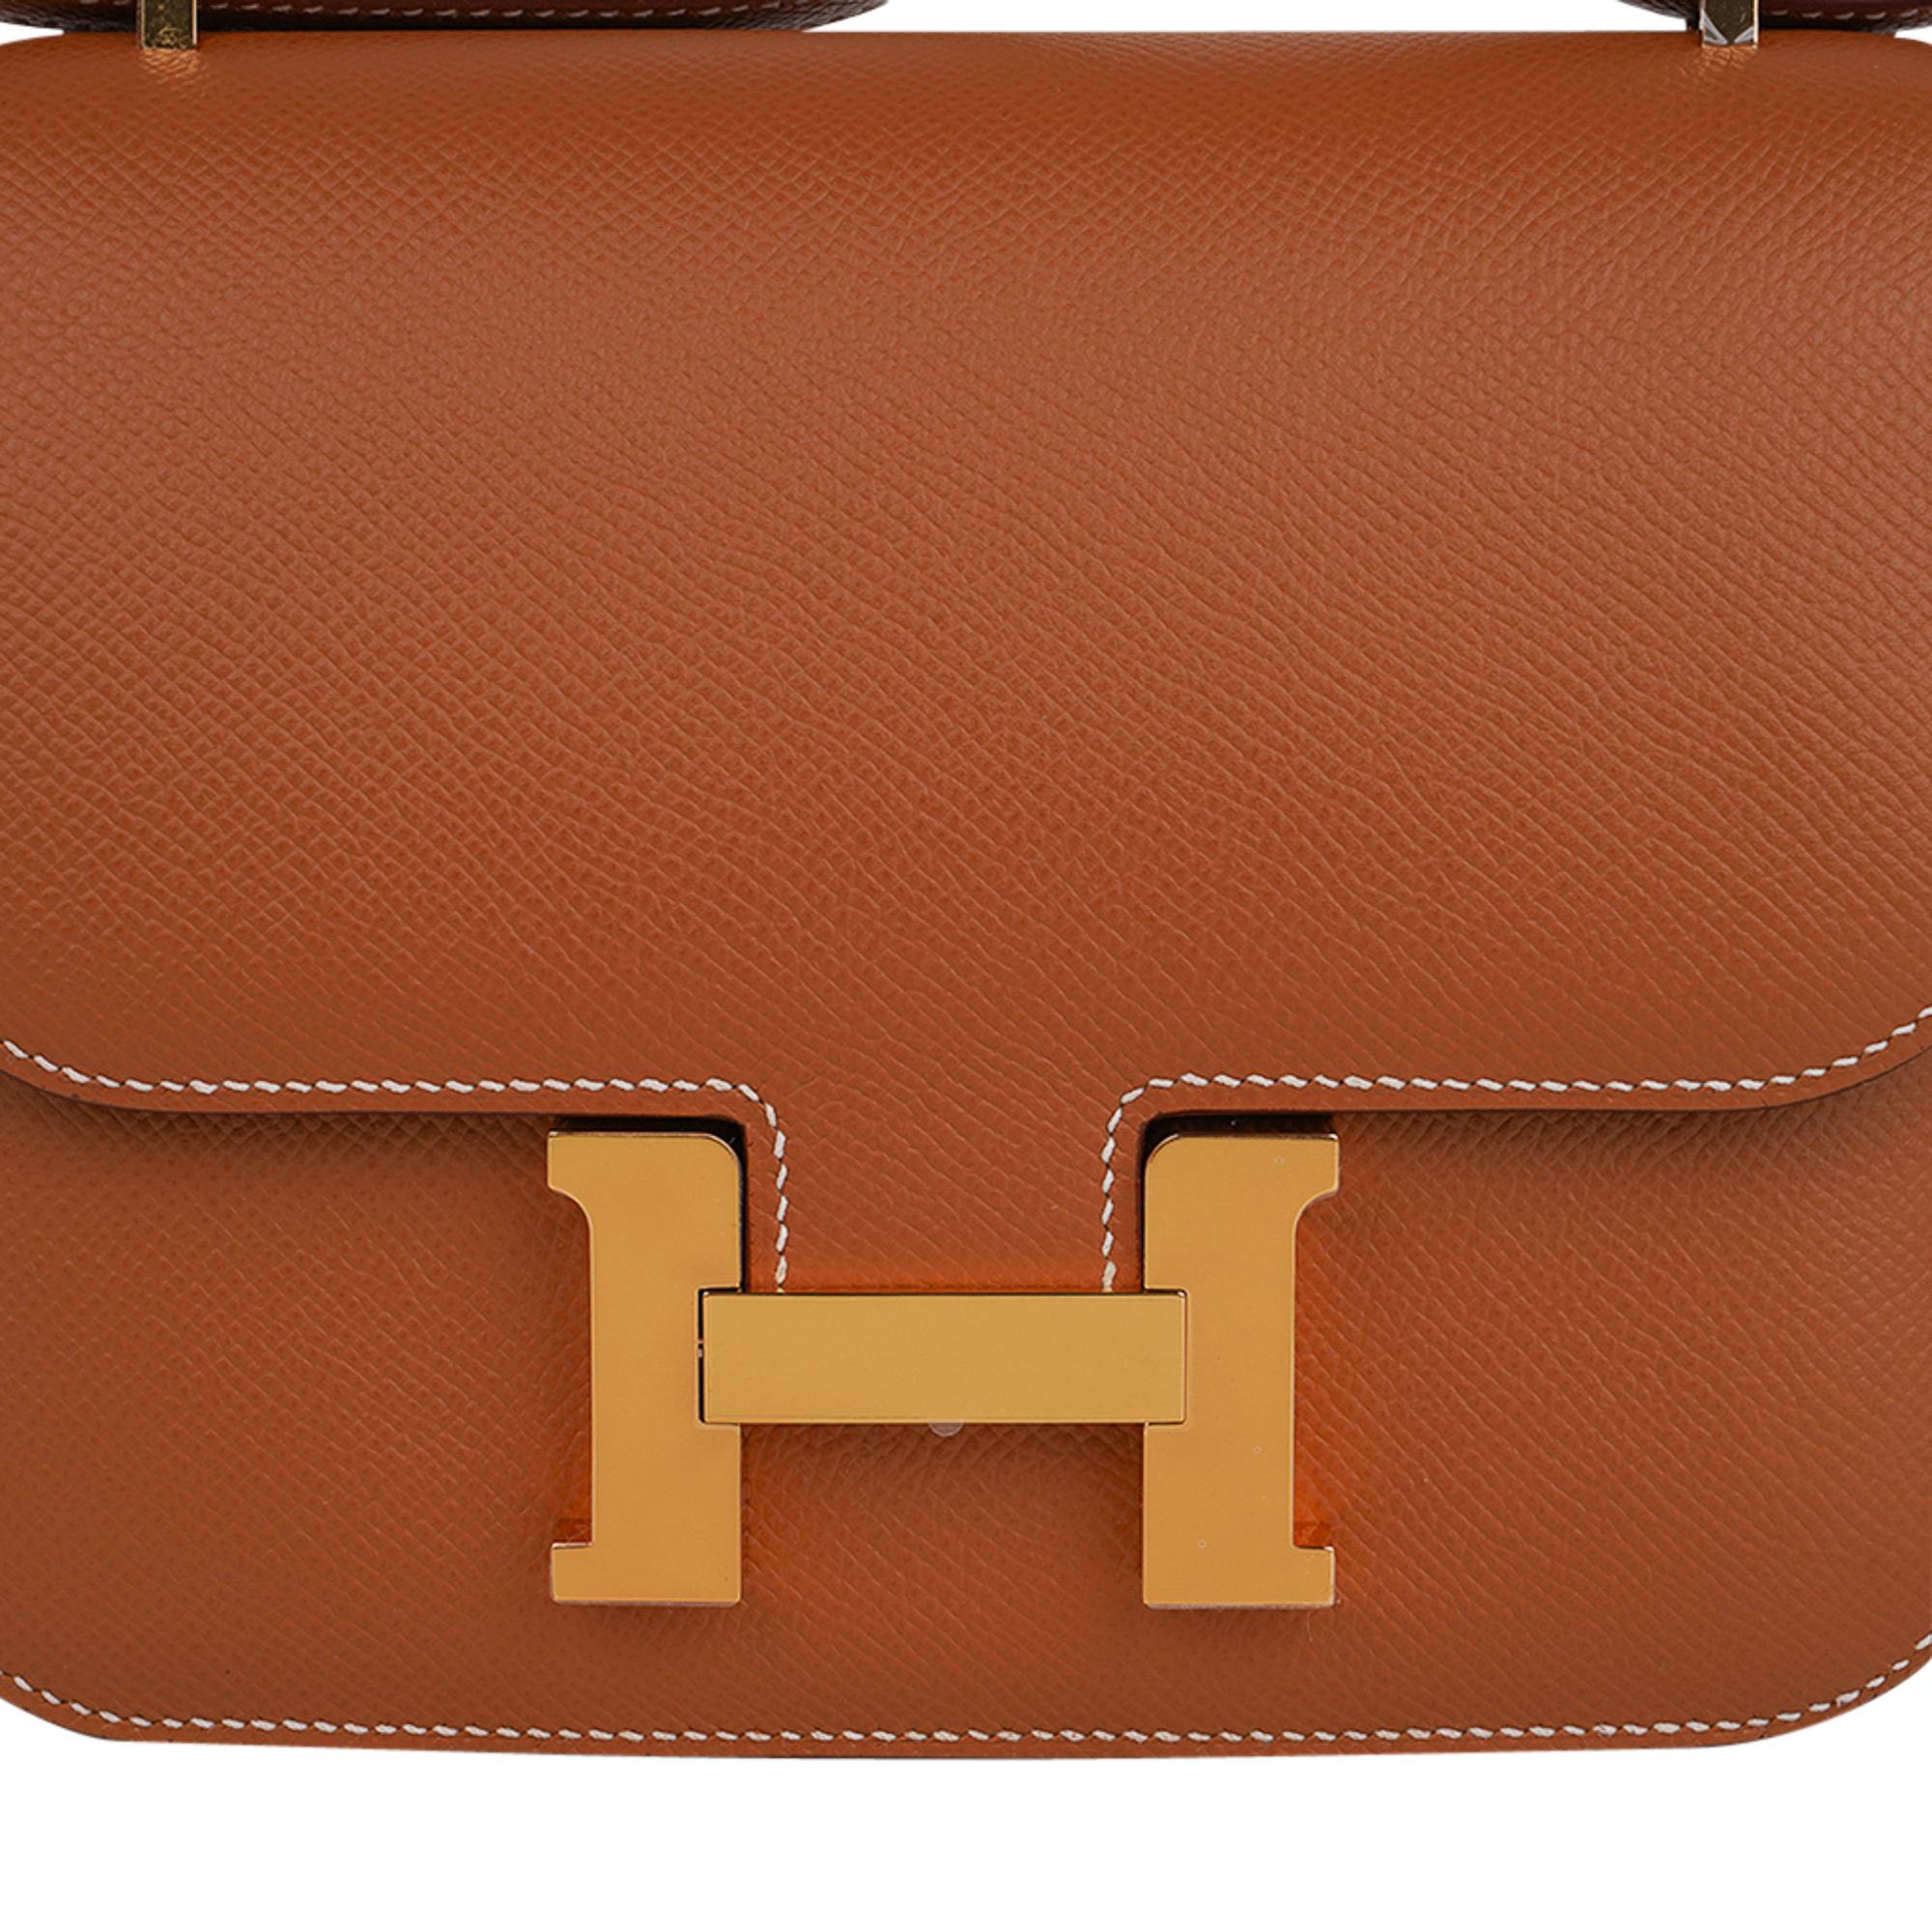 Mightychic offers an Hermes Constance 18 bag featured in classic Gold.
Accentuated with Gold hardware.
Epsom leather with signature bone top stitch.
Carried by hand, over the shoulder, or even cross body! 
HERMES PARIS MADE IN FRANCE is stamped on